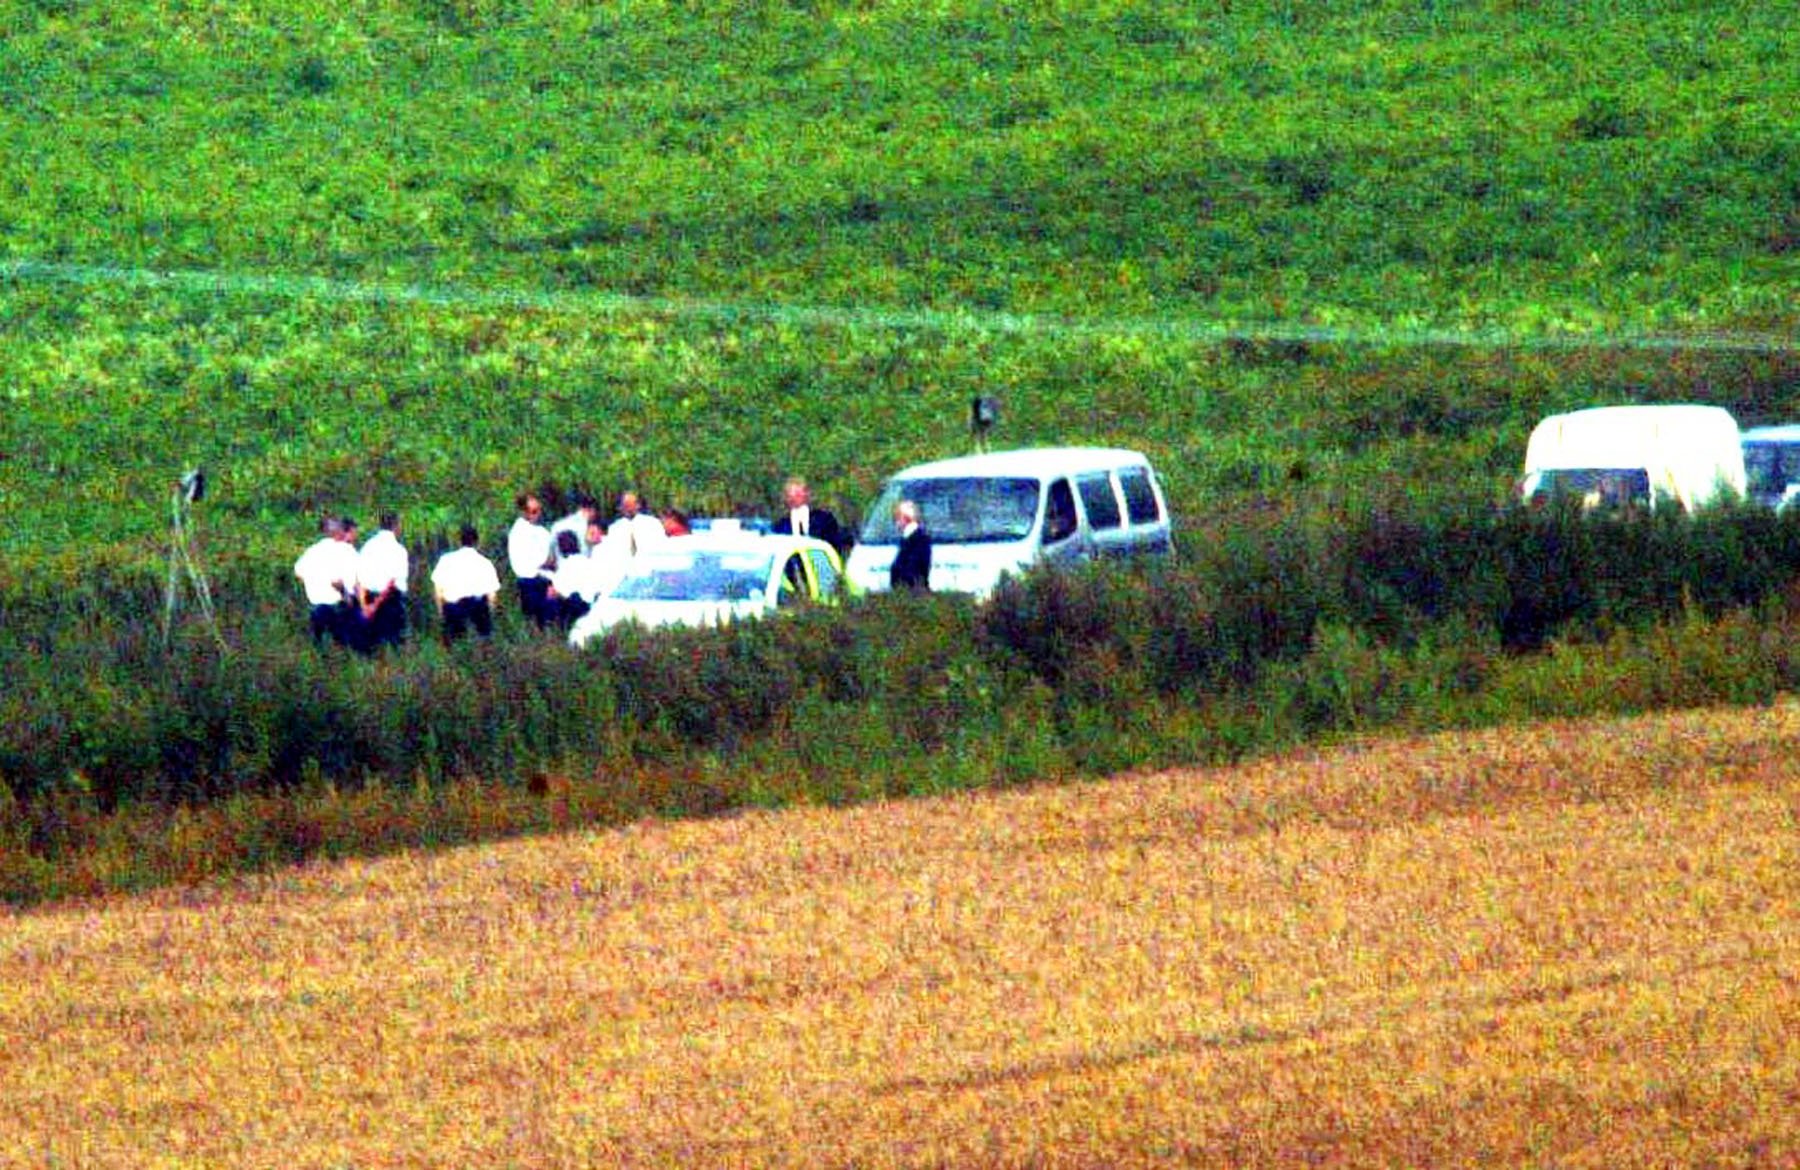 An ambulance arrives at Wangford Fen, near Lakenheath, Suffolk, after the two bodies were found